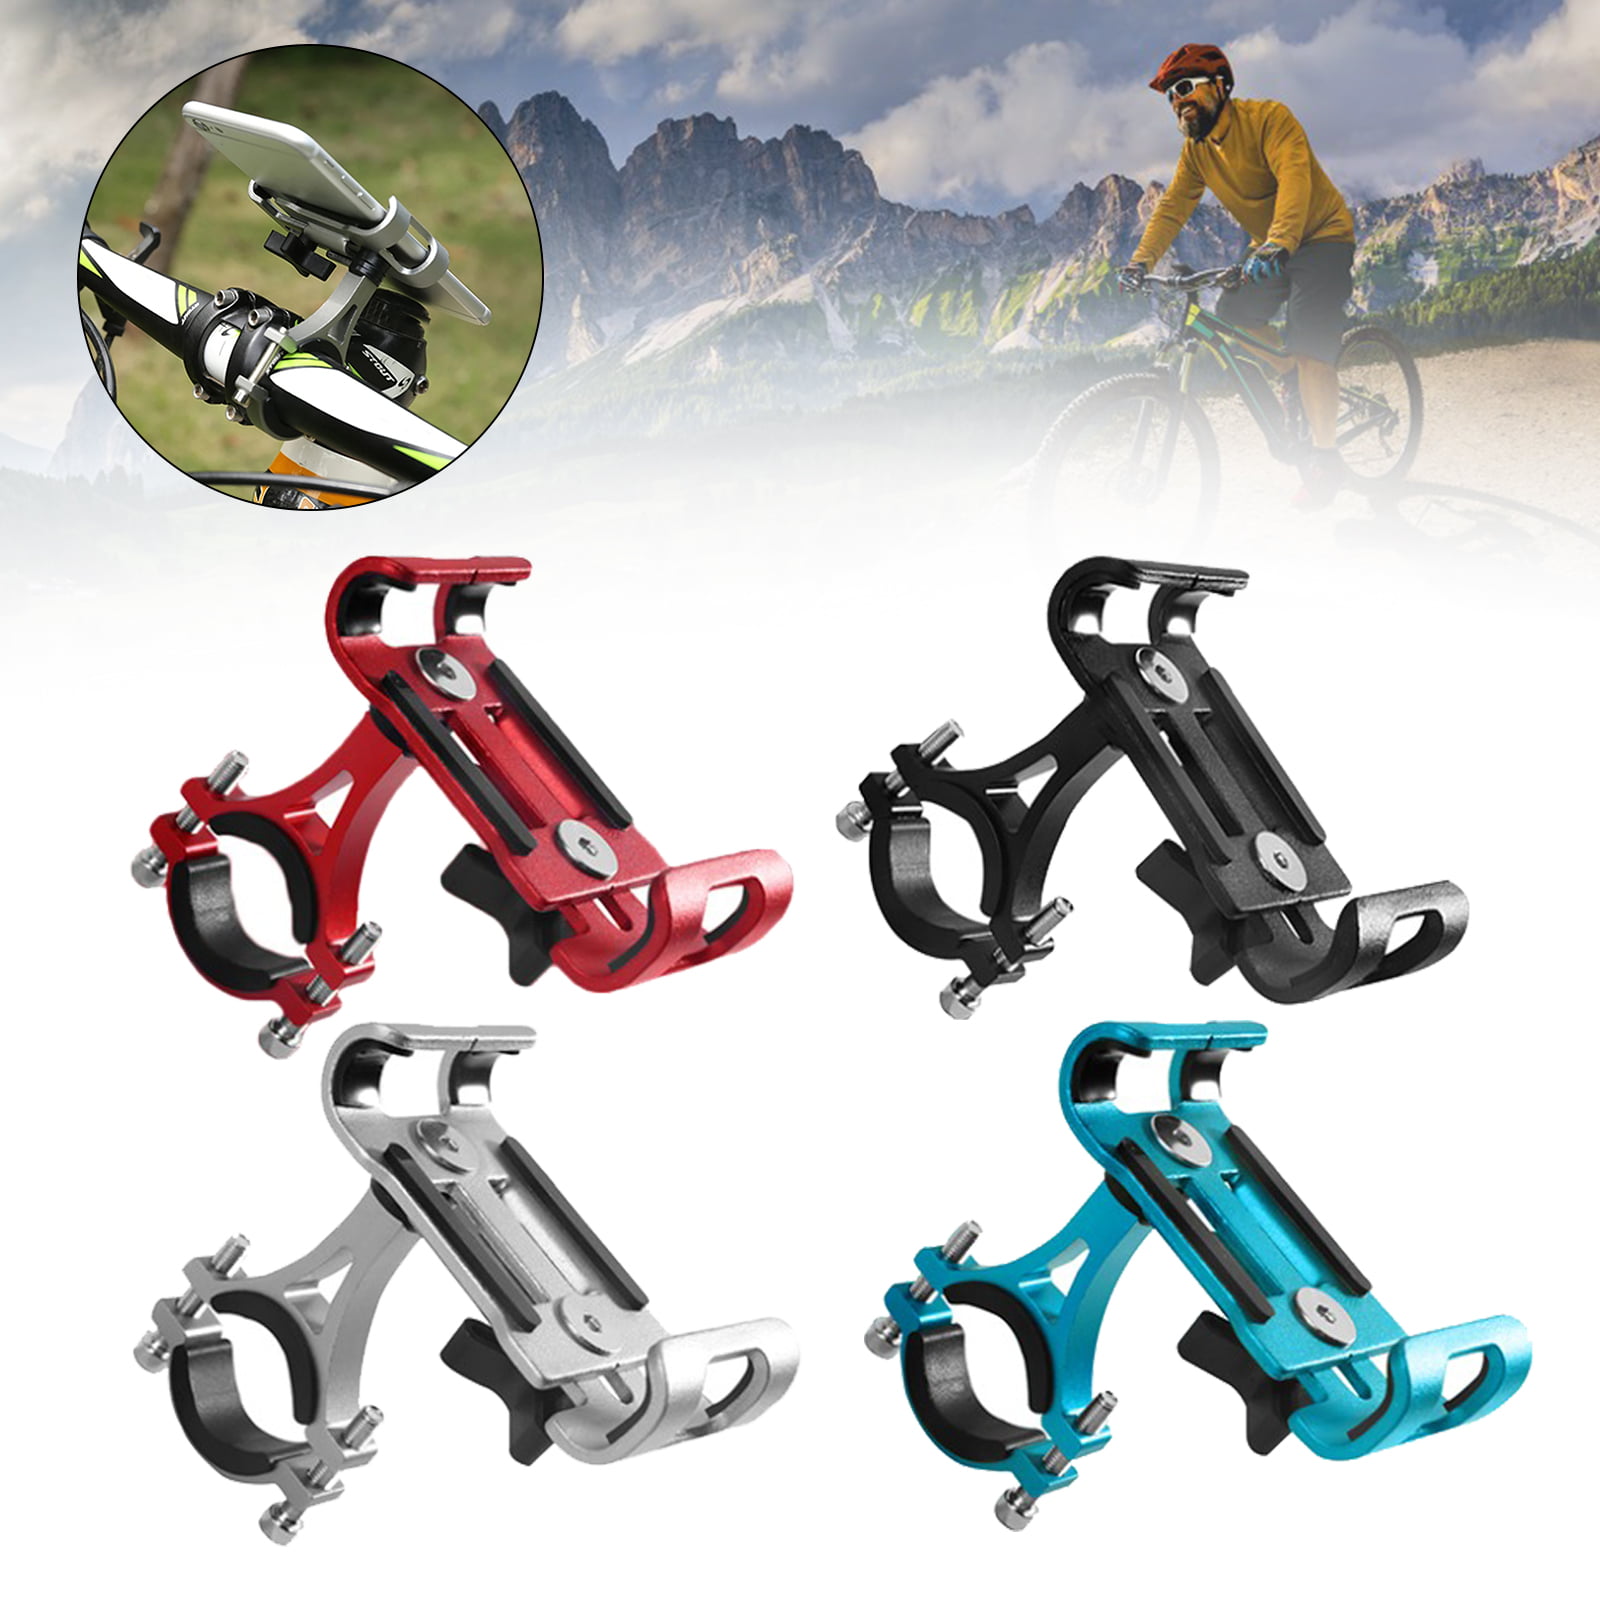 N\A 2 Pcs Computer Handlebars Adjustable Bicycle Edge Mount for Mountain and Road Bike 